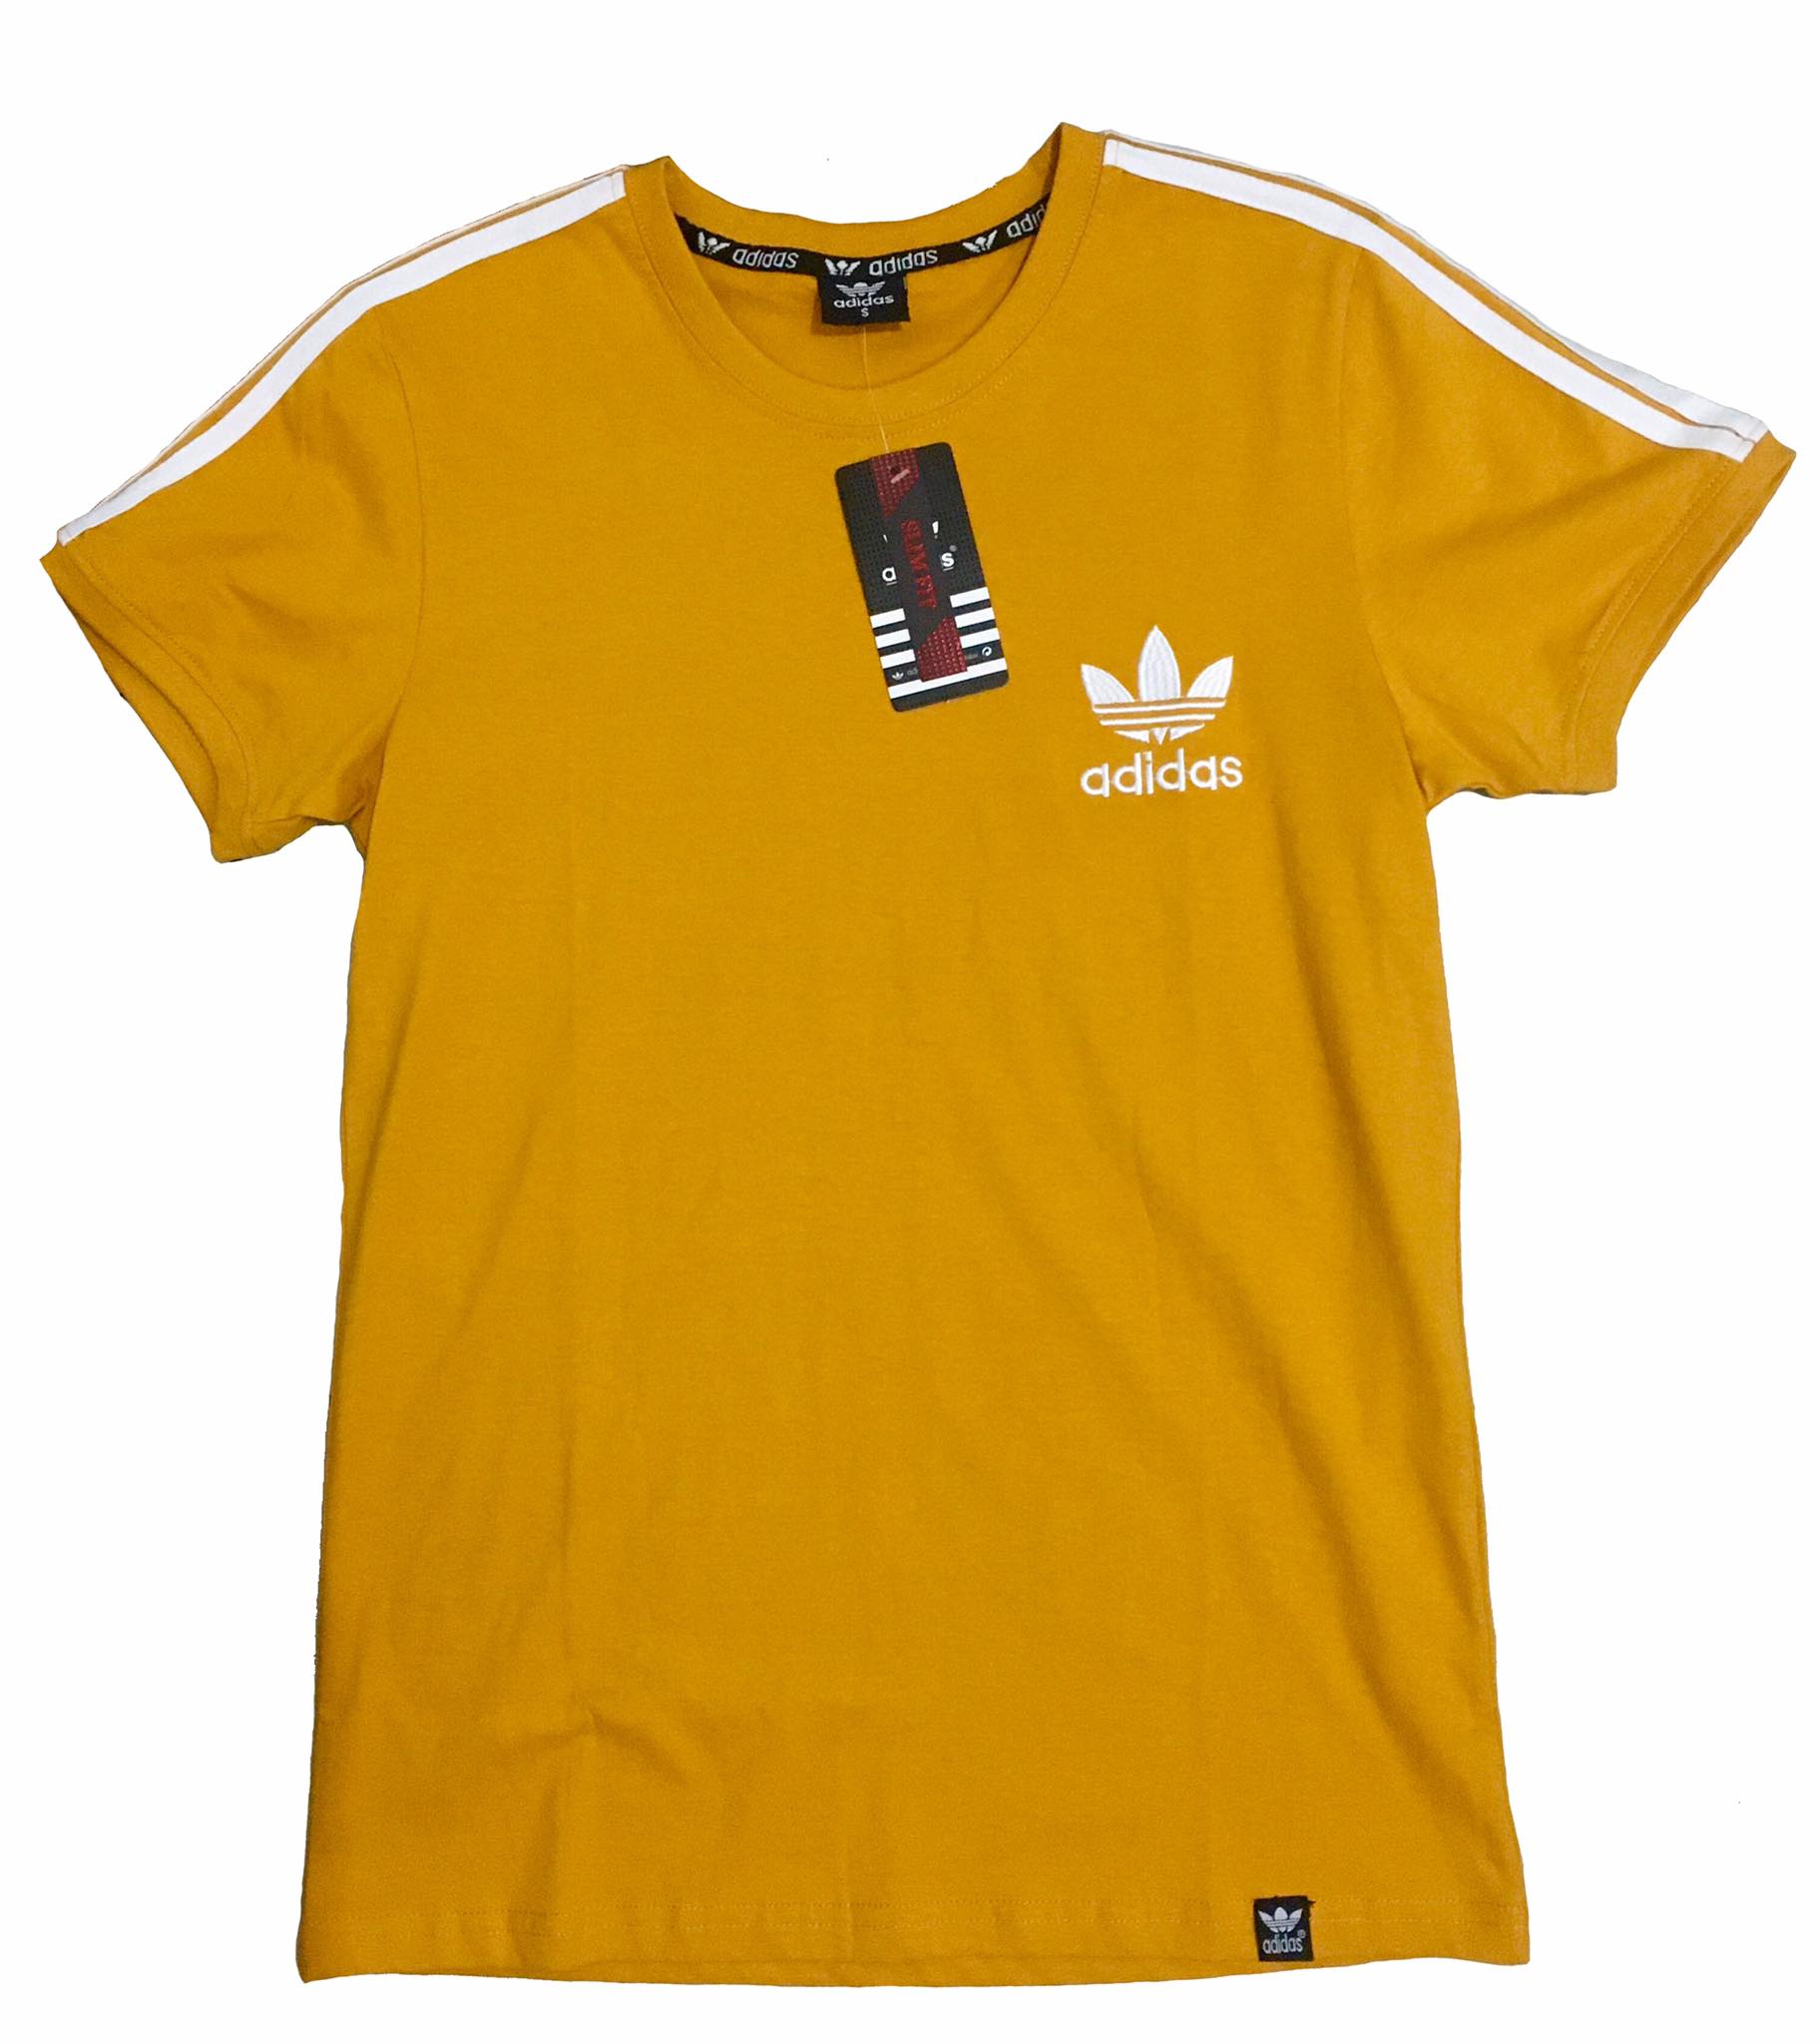 adidas sports t shirts for mens